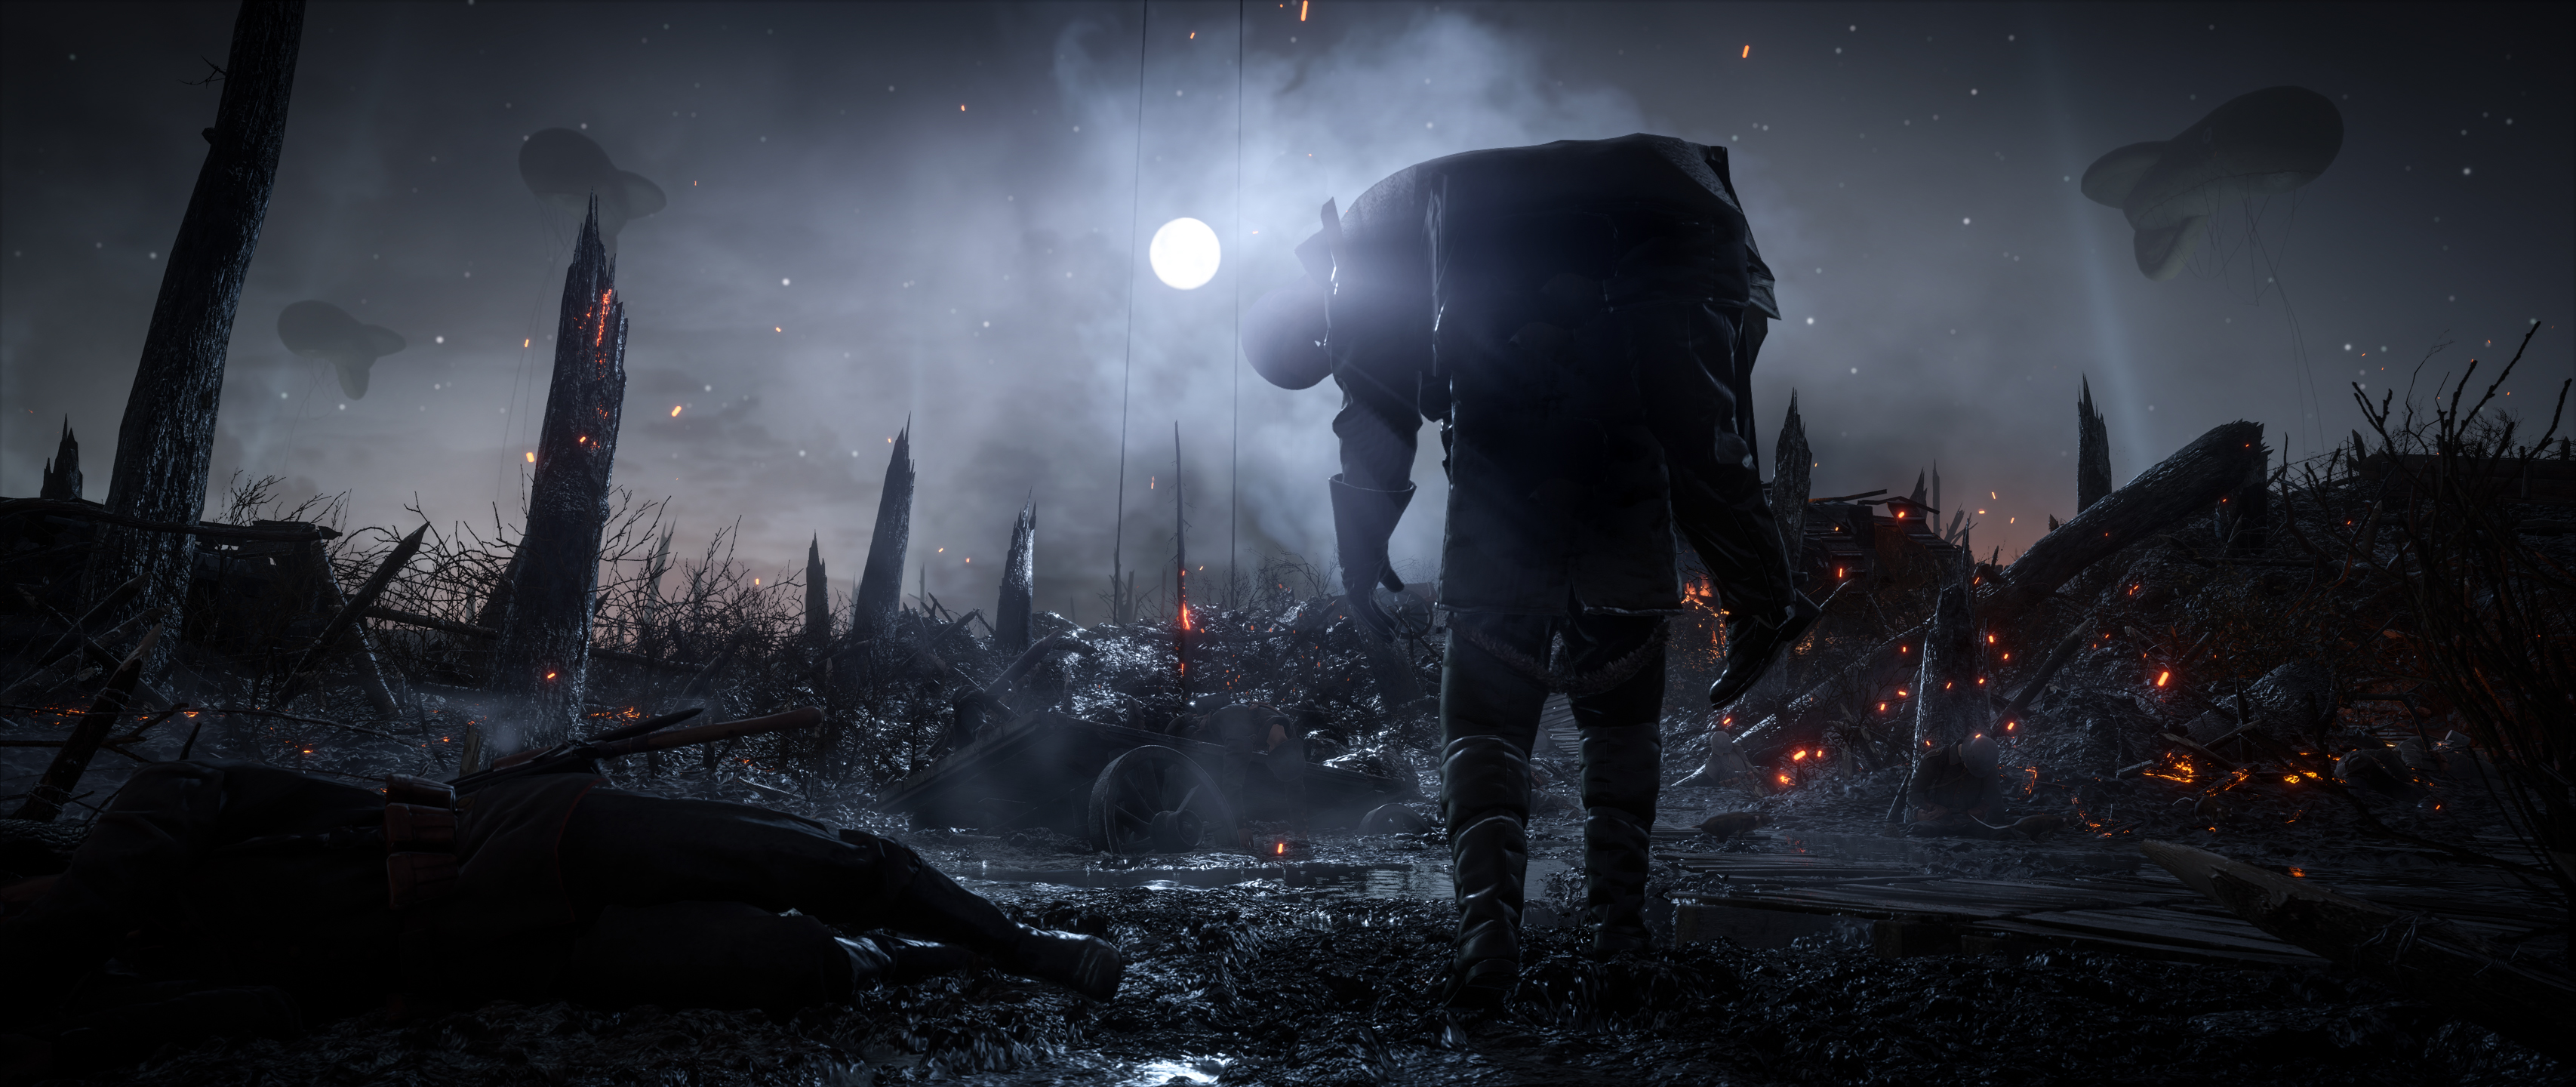 Battlefield 1 HD Wallpapers, Pictures, Images